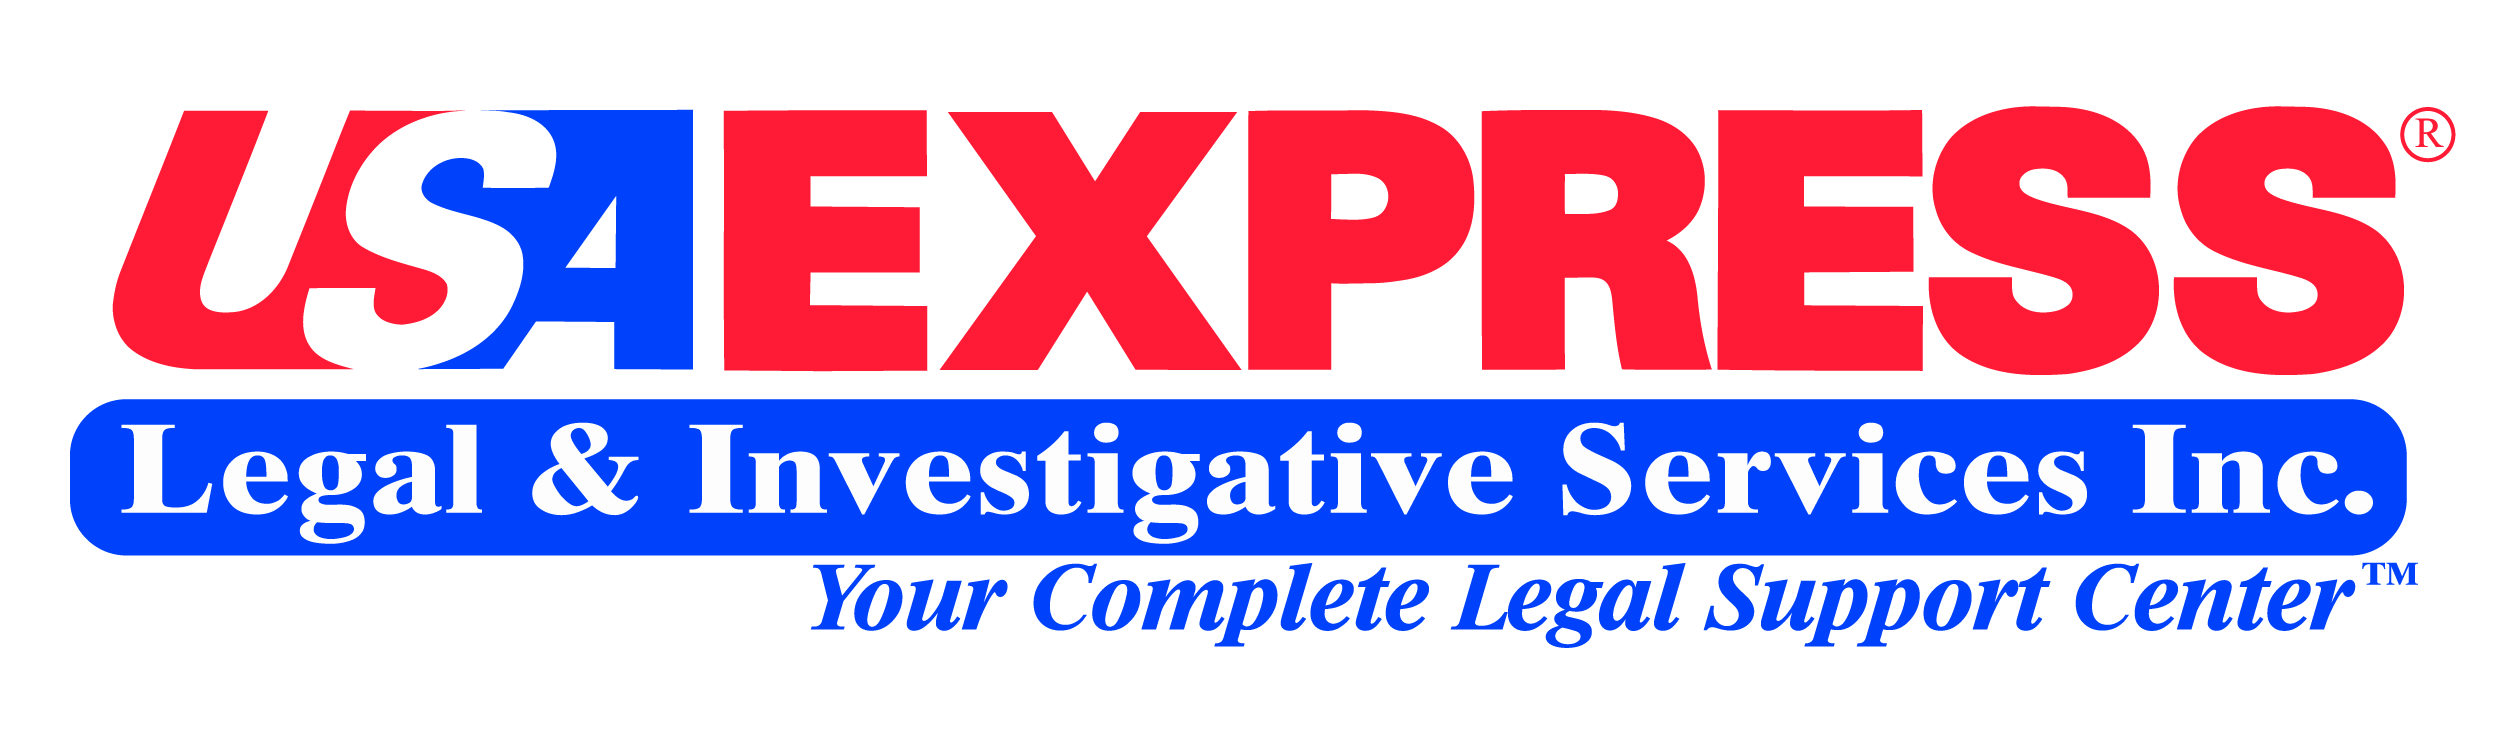 USA Express Legal and Investigative Services Inc.